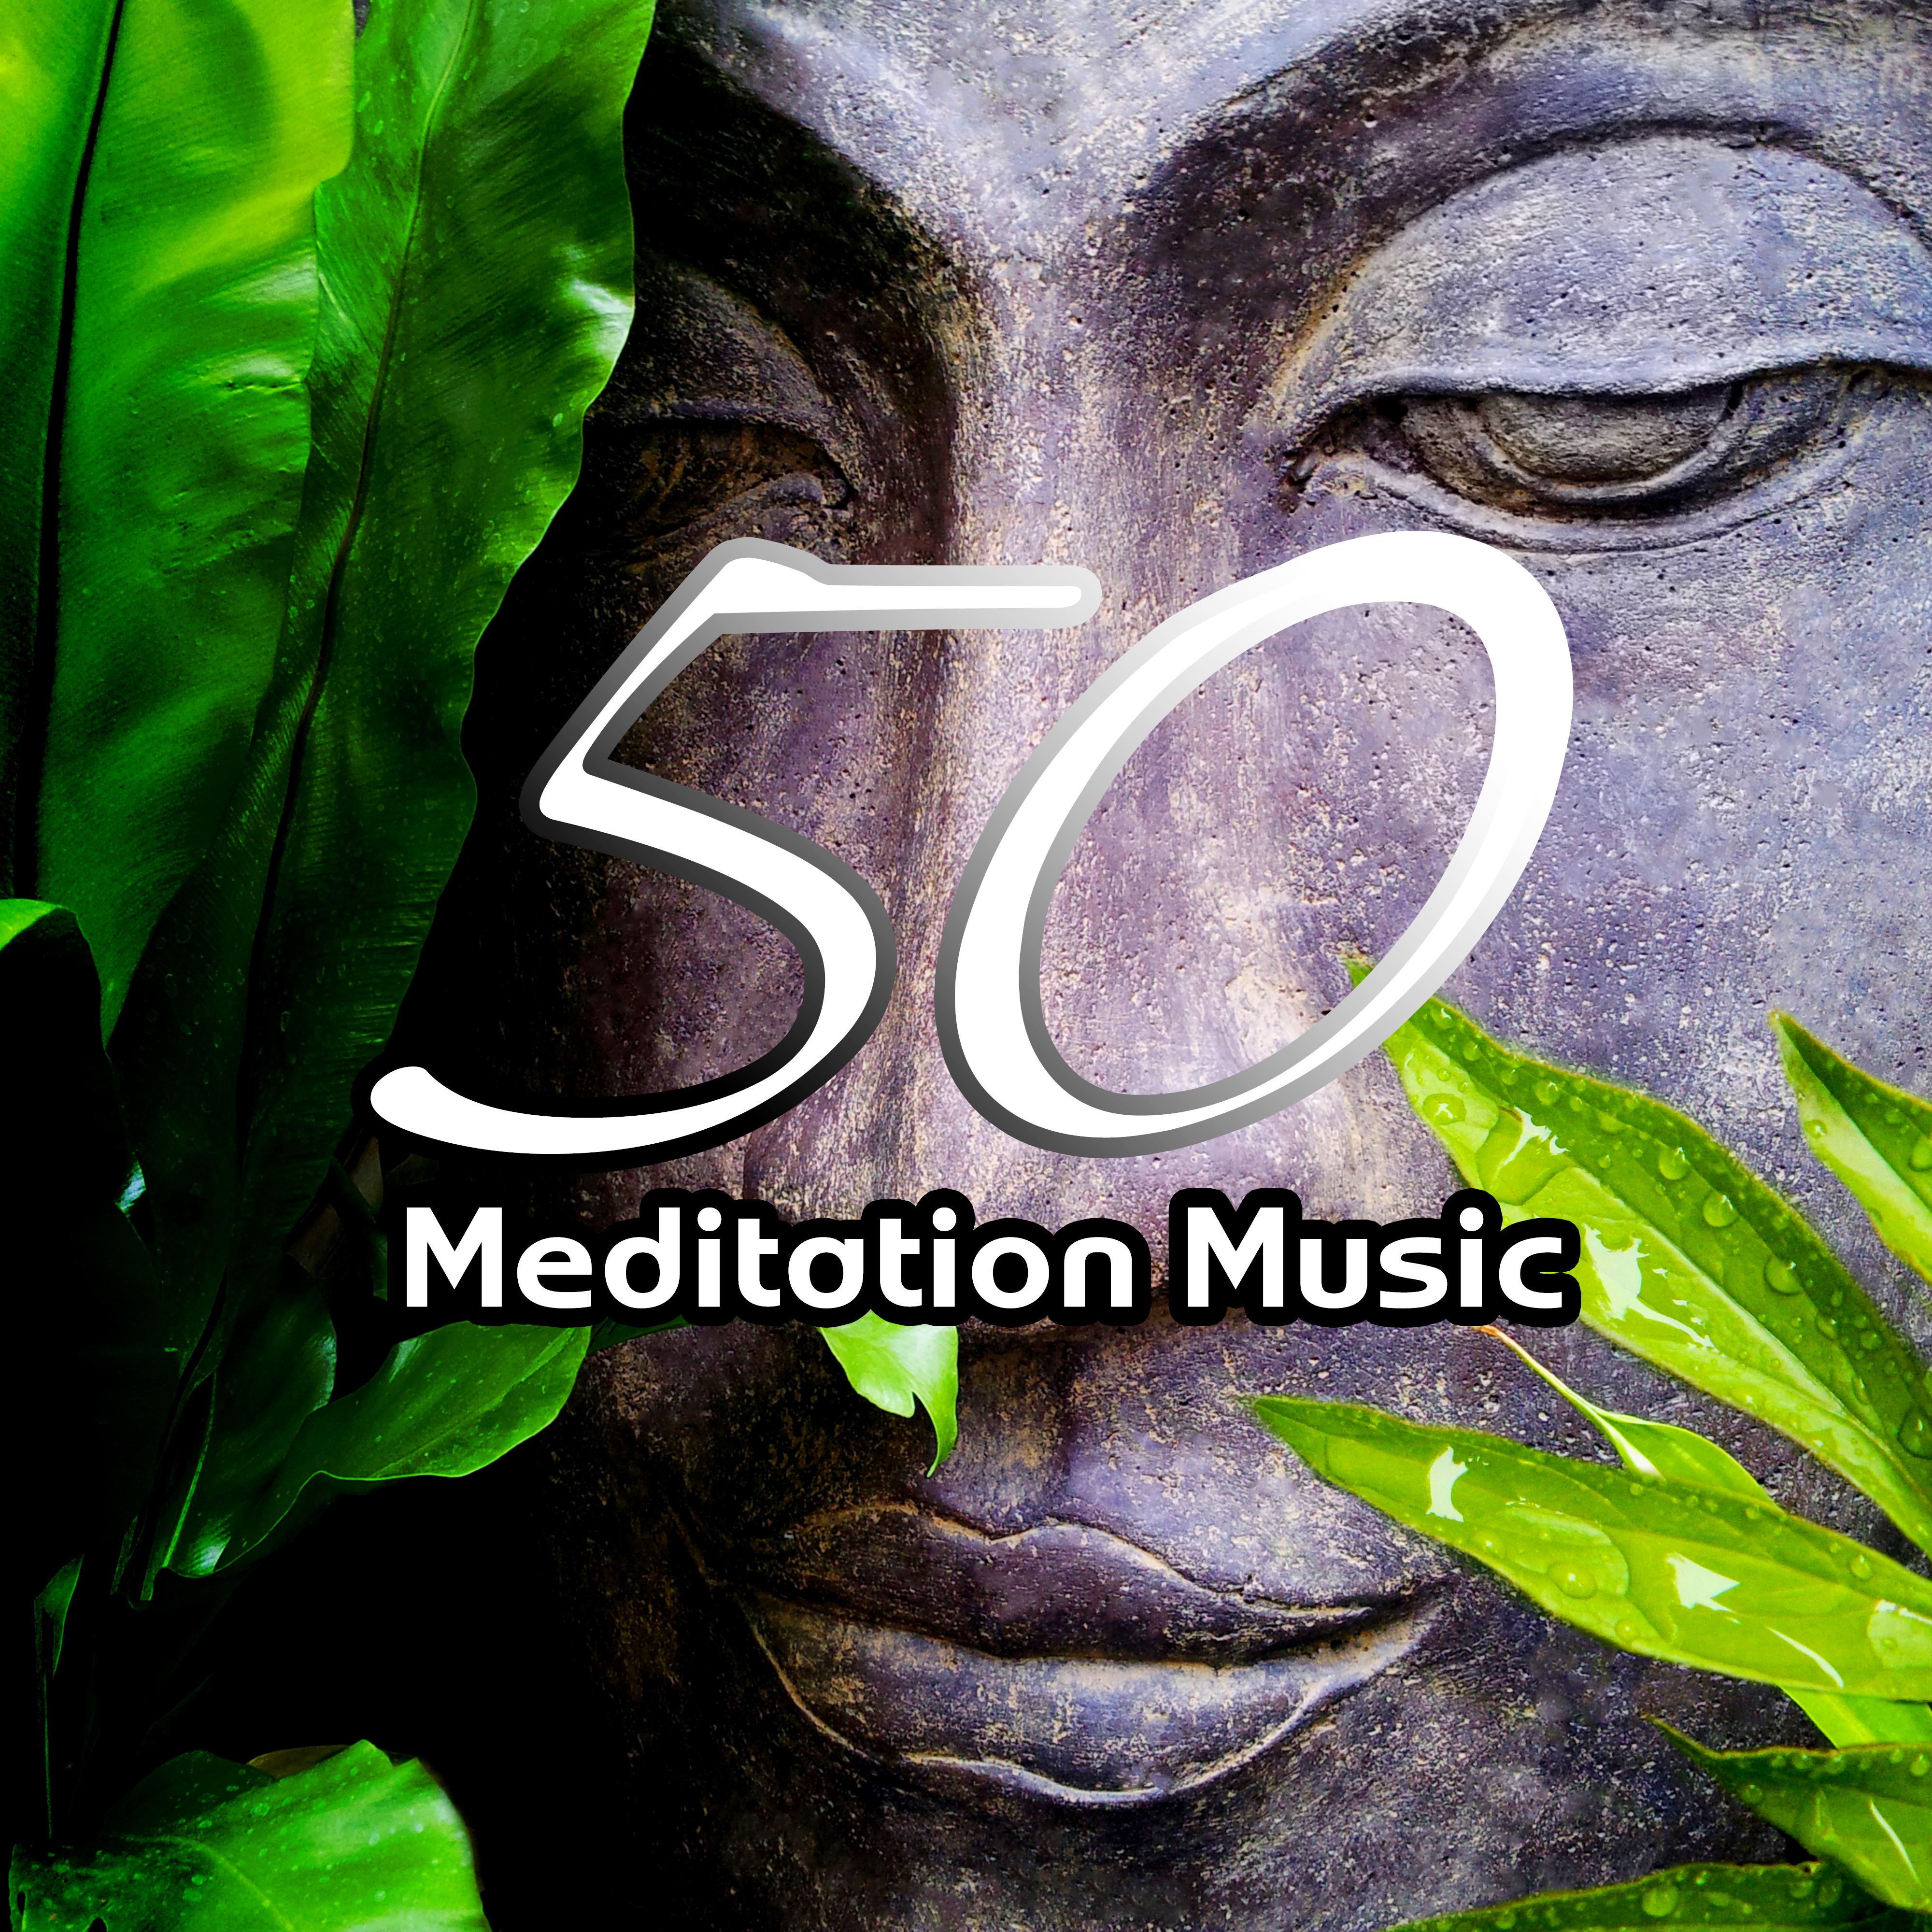 Meditation Music 50 – Relaxing Songs for Mindfulness Meditation & Yoga Exercises, Guided Imagery Music, Asian Zen Spa and Massage, Natural White Noise, Sounds of Nature